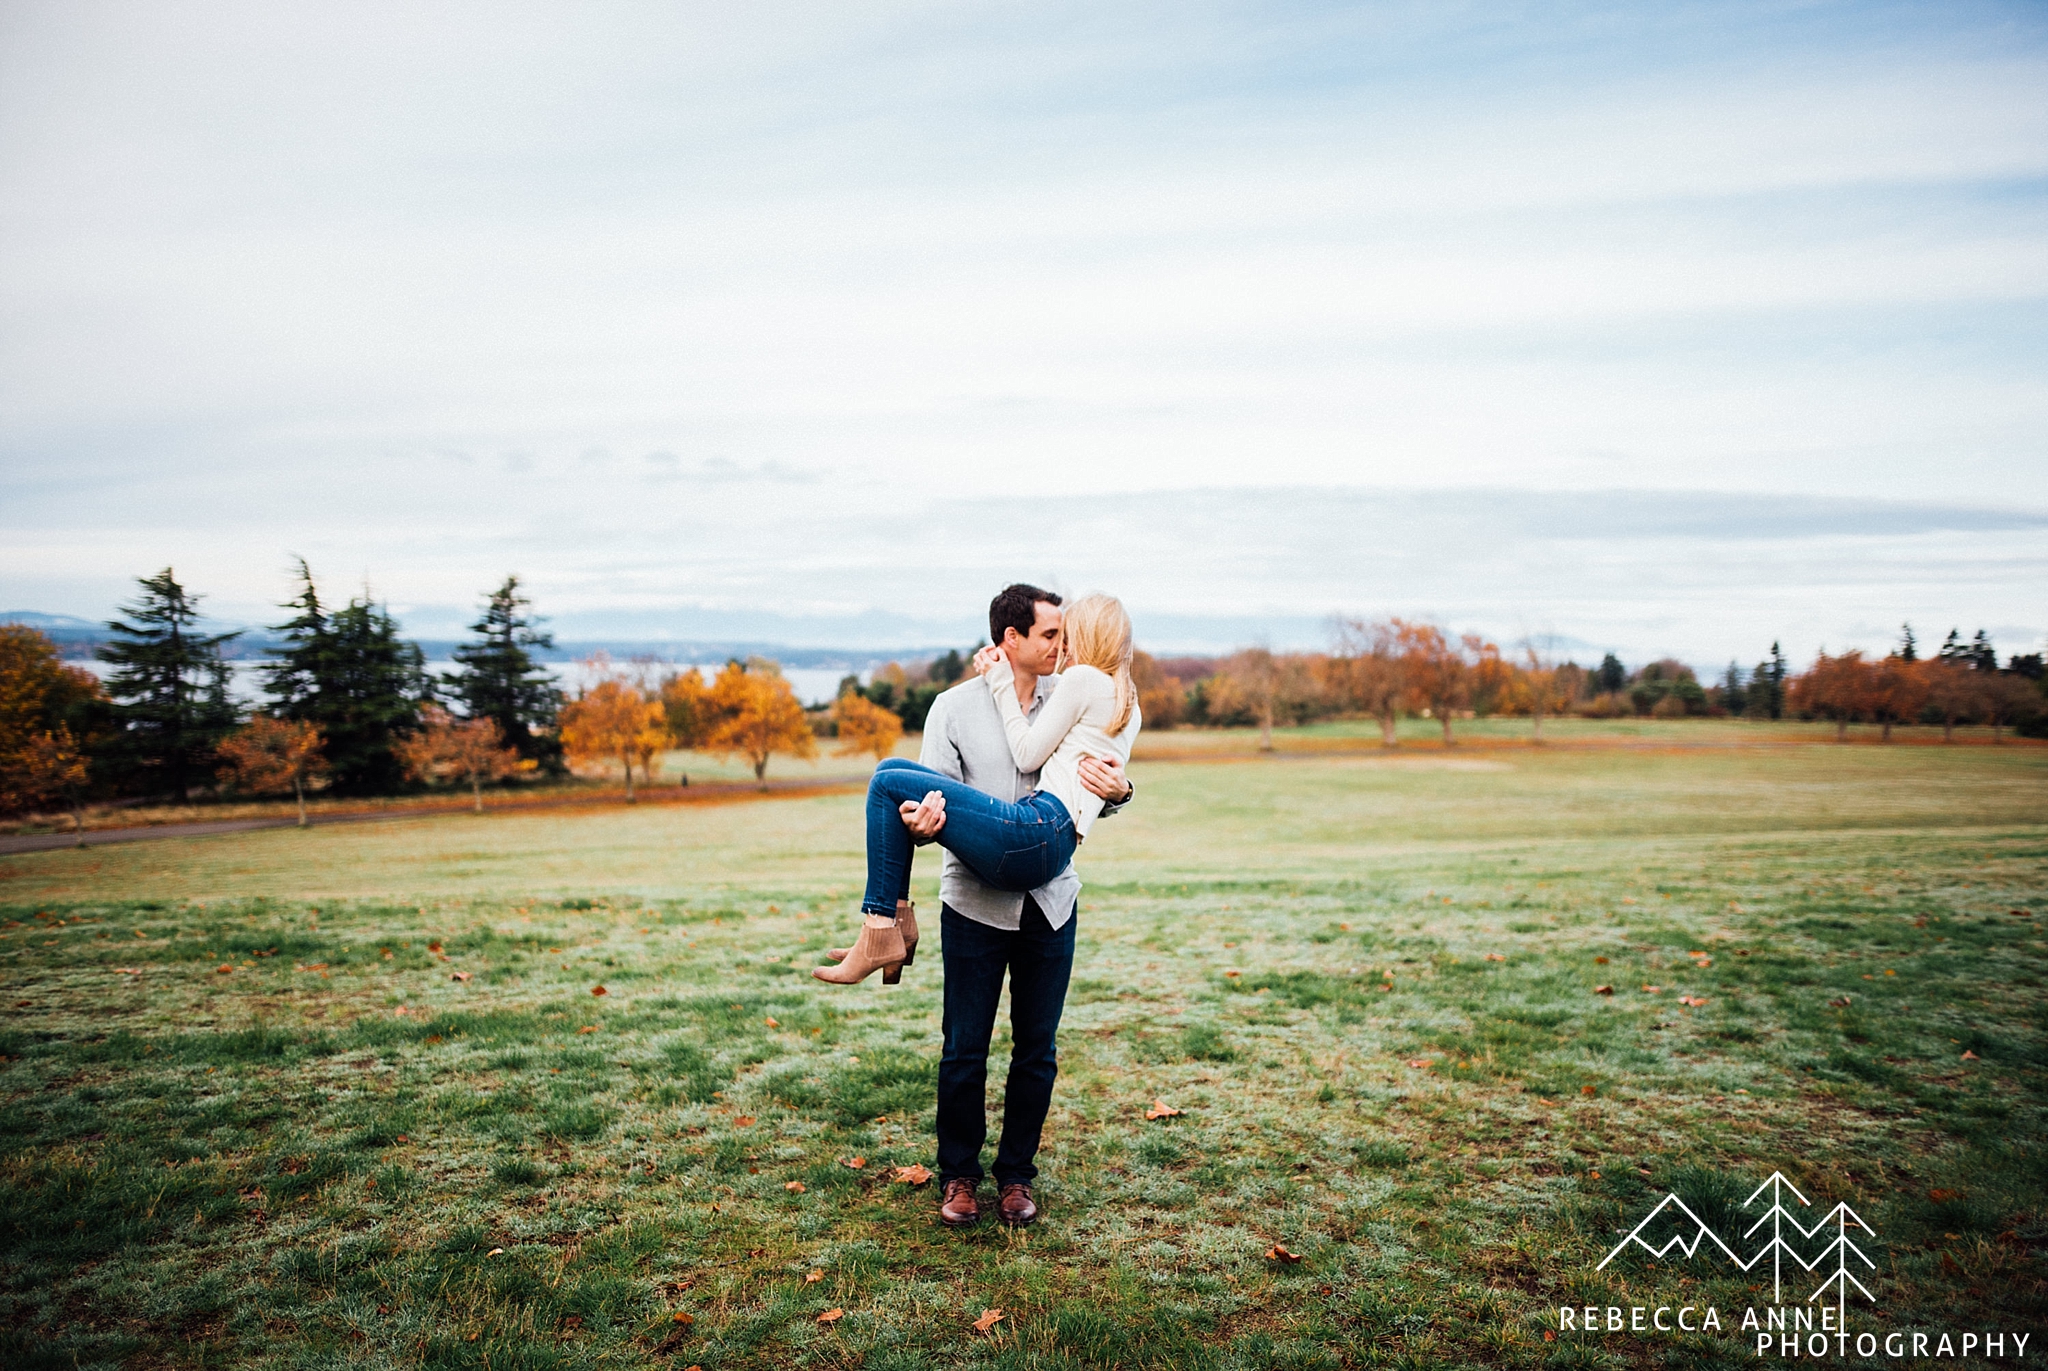 Discovery Park Engagement,Tacoma Engagement Photographer,Tacoma Engagement Photography,Seattle Engagement Photographer,Seattle Engagement Photography,Washington Engagement Photographer,Pacific Northwest Engagement Photographer,Seattle Engagement Photos,Tacoma Engagement Photos,